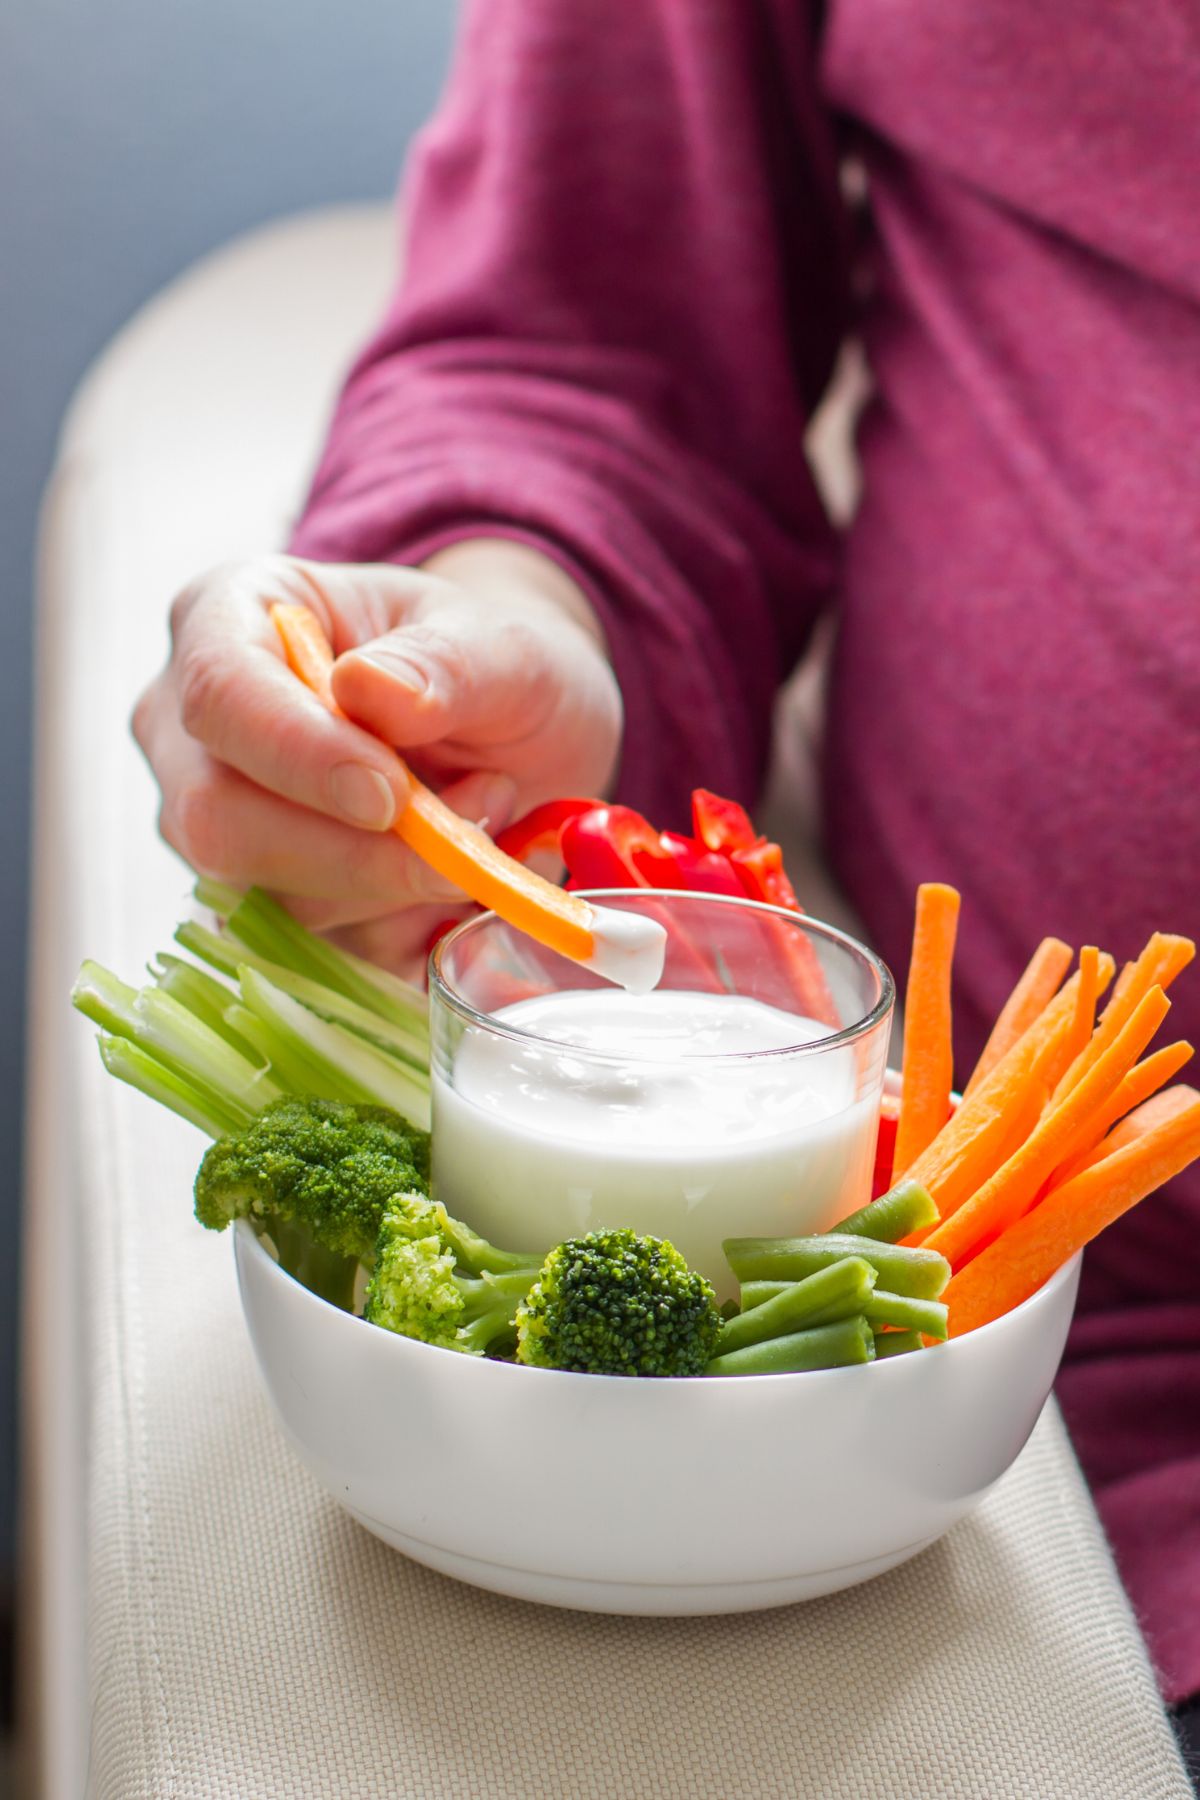 Pregnant woman in purple shirt Dips a carrot stick into sour cream dip.